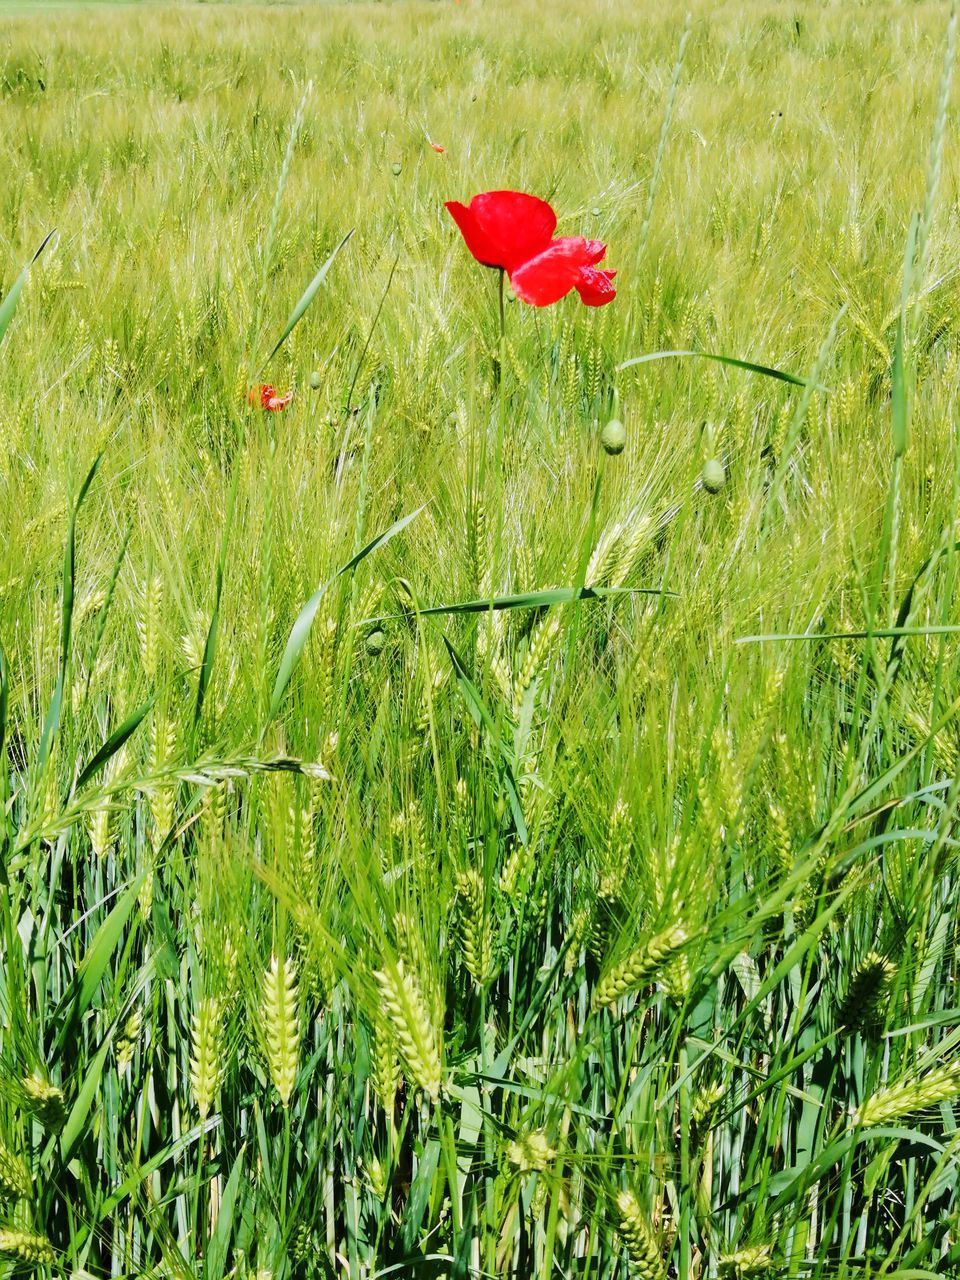 CLOSE-UP OF RED POPPY ON FIELD